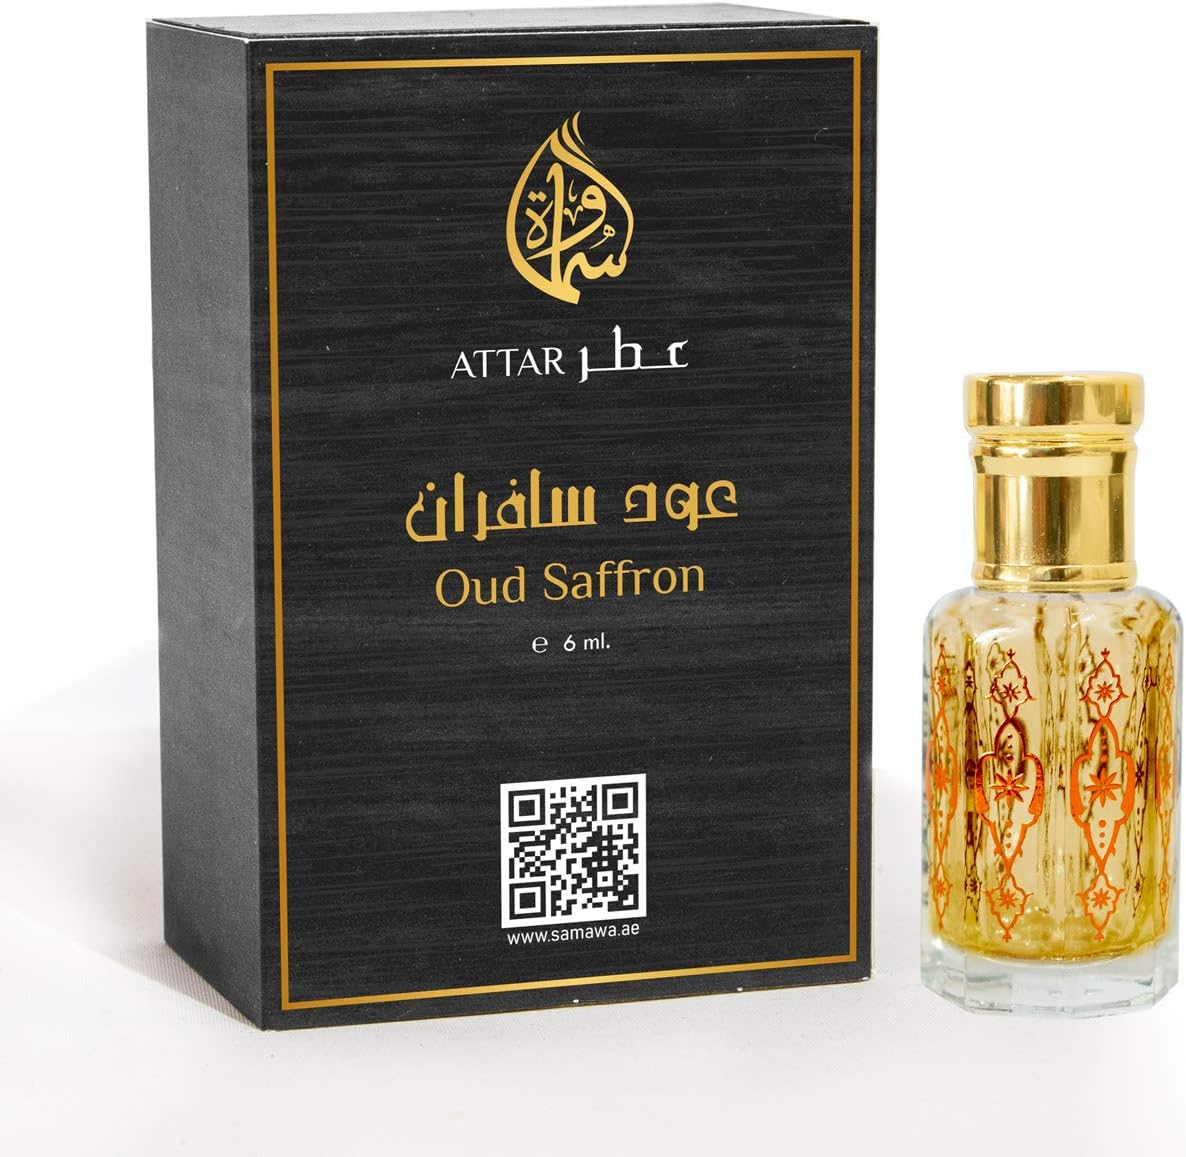 Samawa Oud Saffron Attar, Concentrated Perfume Oil For Unisex, 6ml